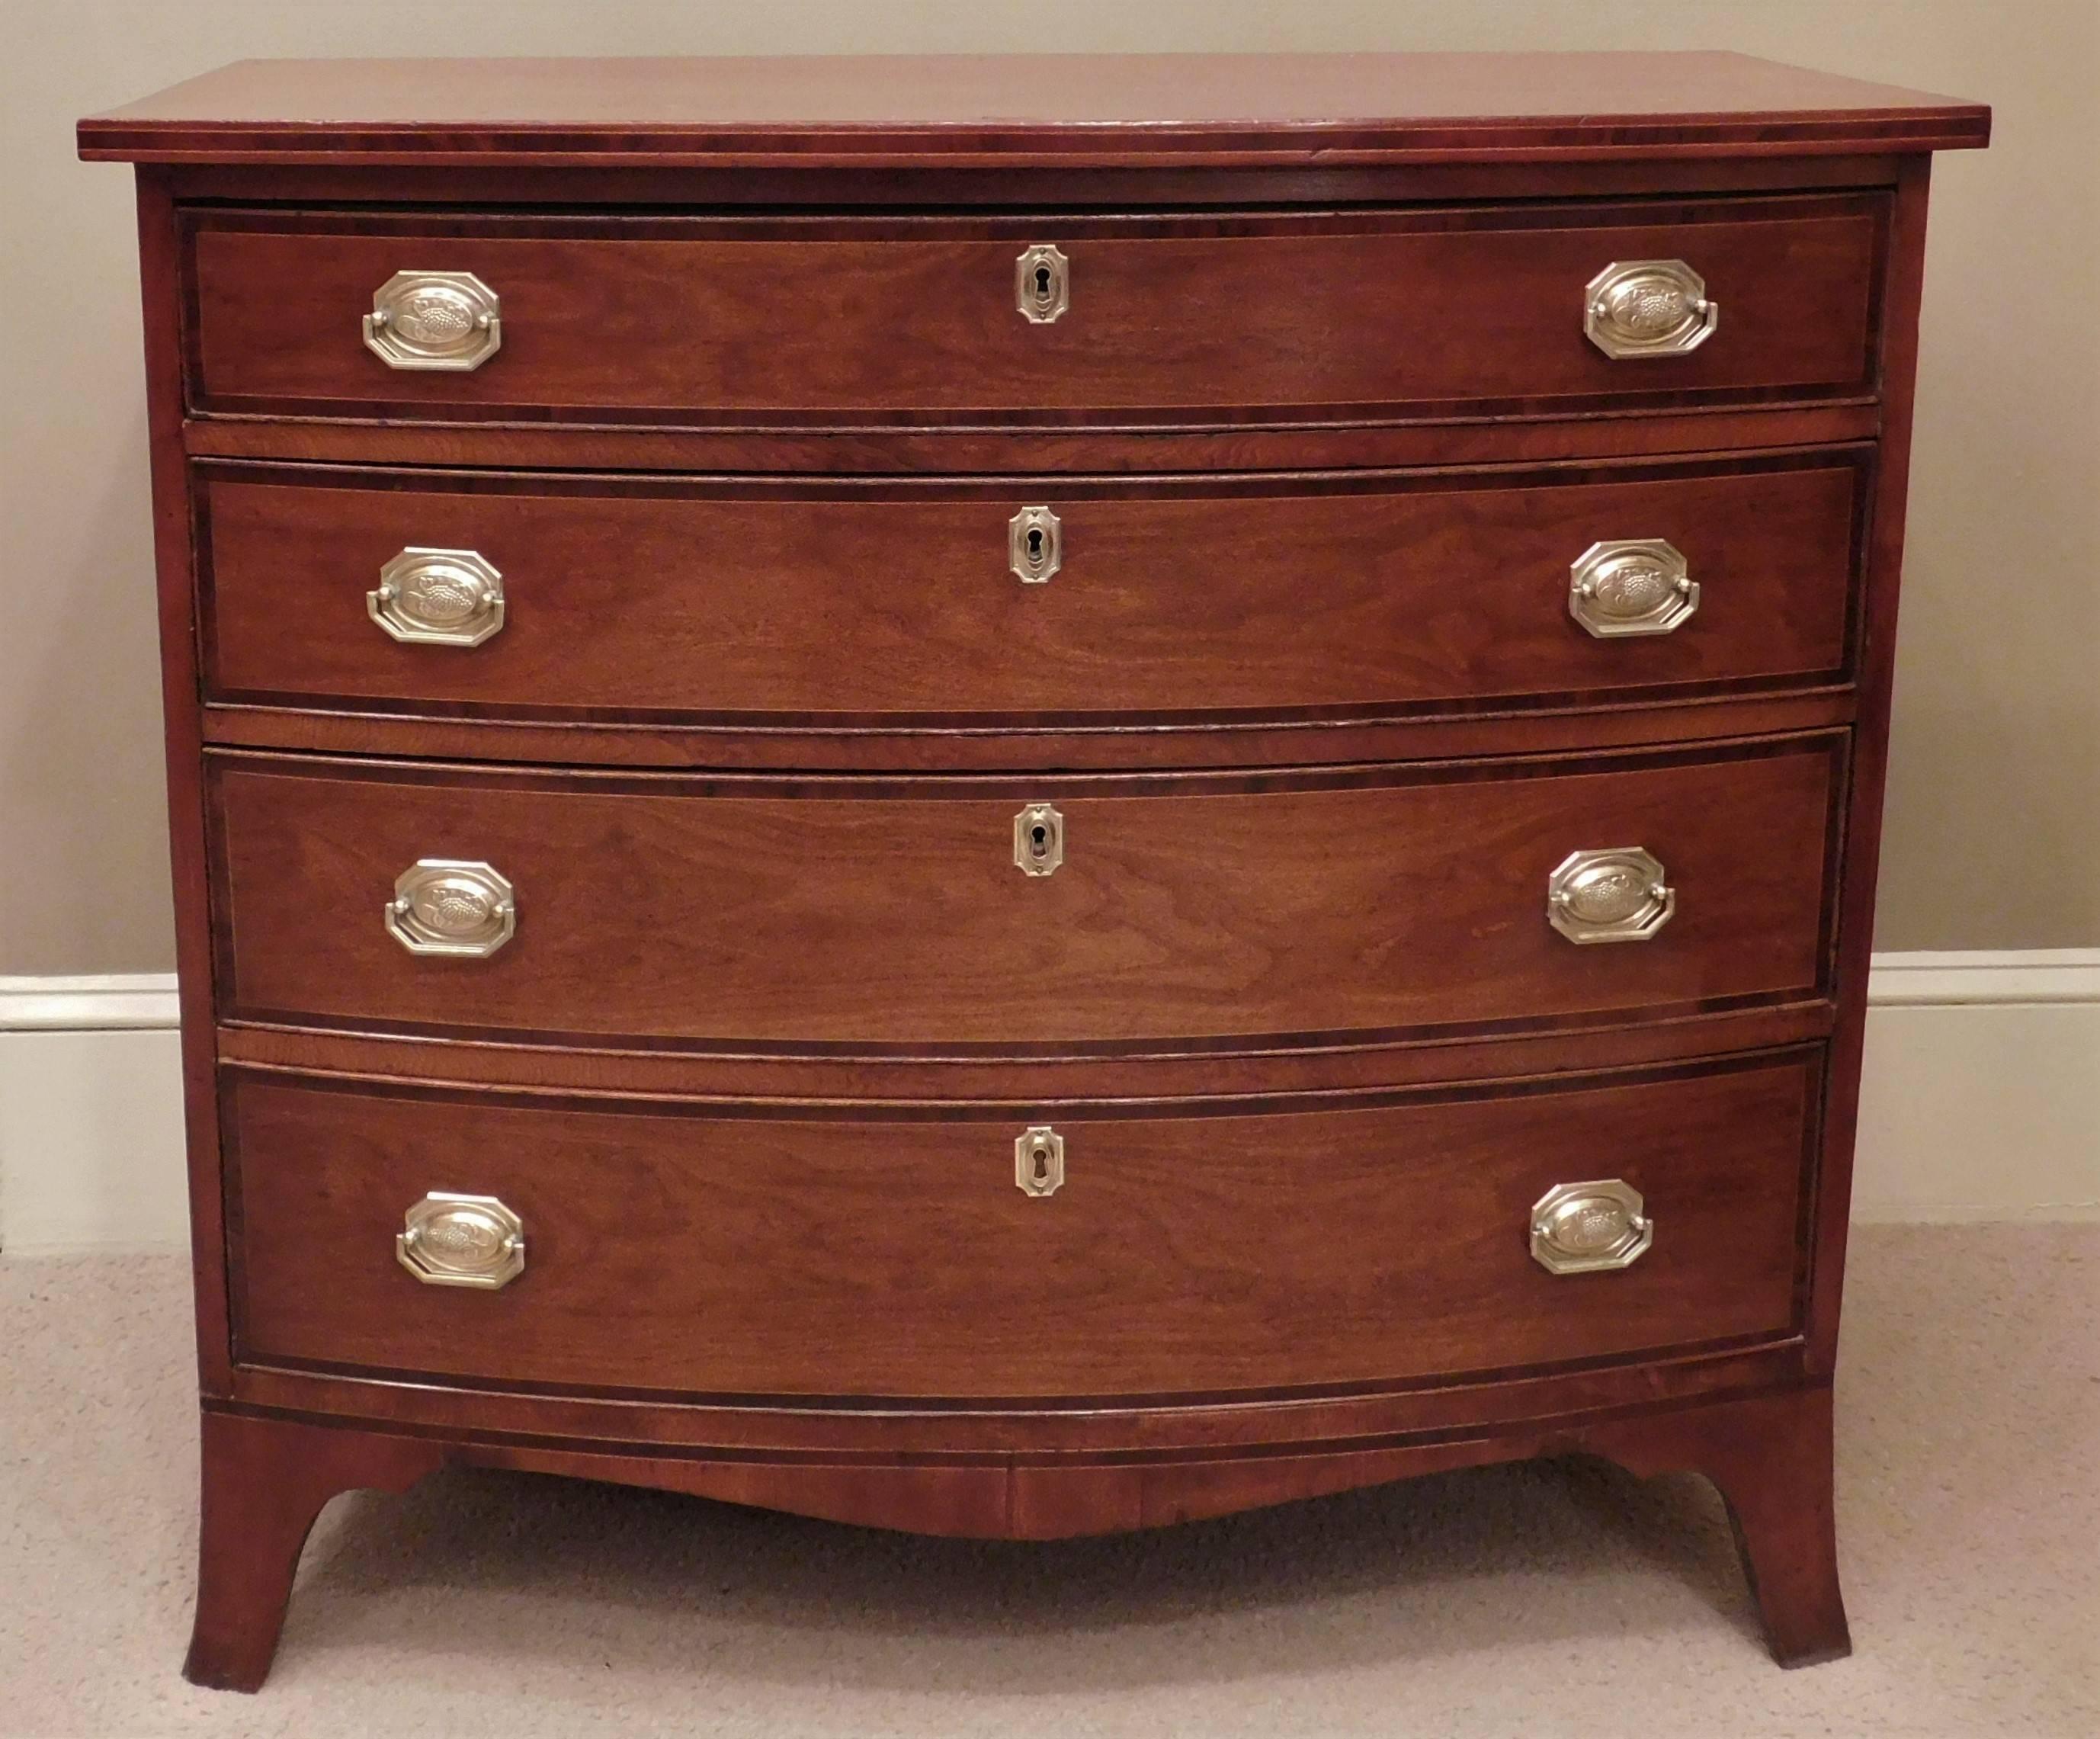 This federal chest is French polished cherry with mahogany and boxwood banding and pine secondary. It has four graduated drawers French bracket feet shaped skirt and old replaced handmade brass pulls. It has a rich glow and excellent patina.